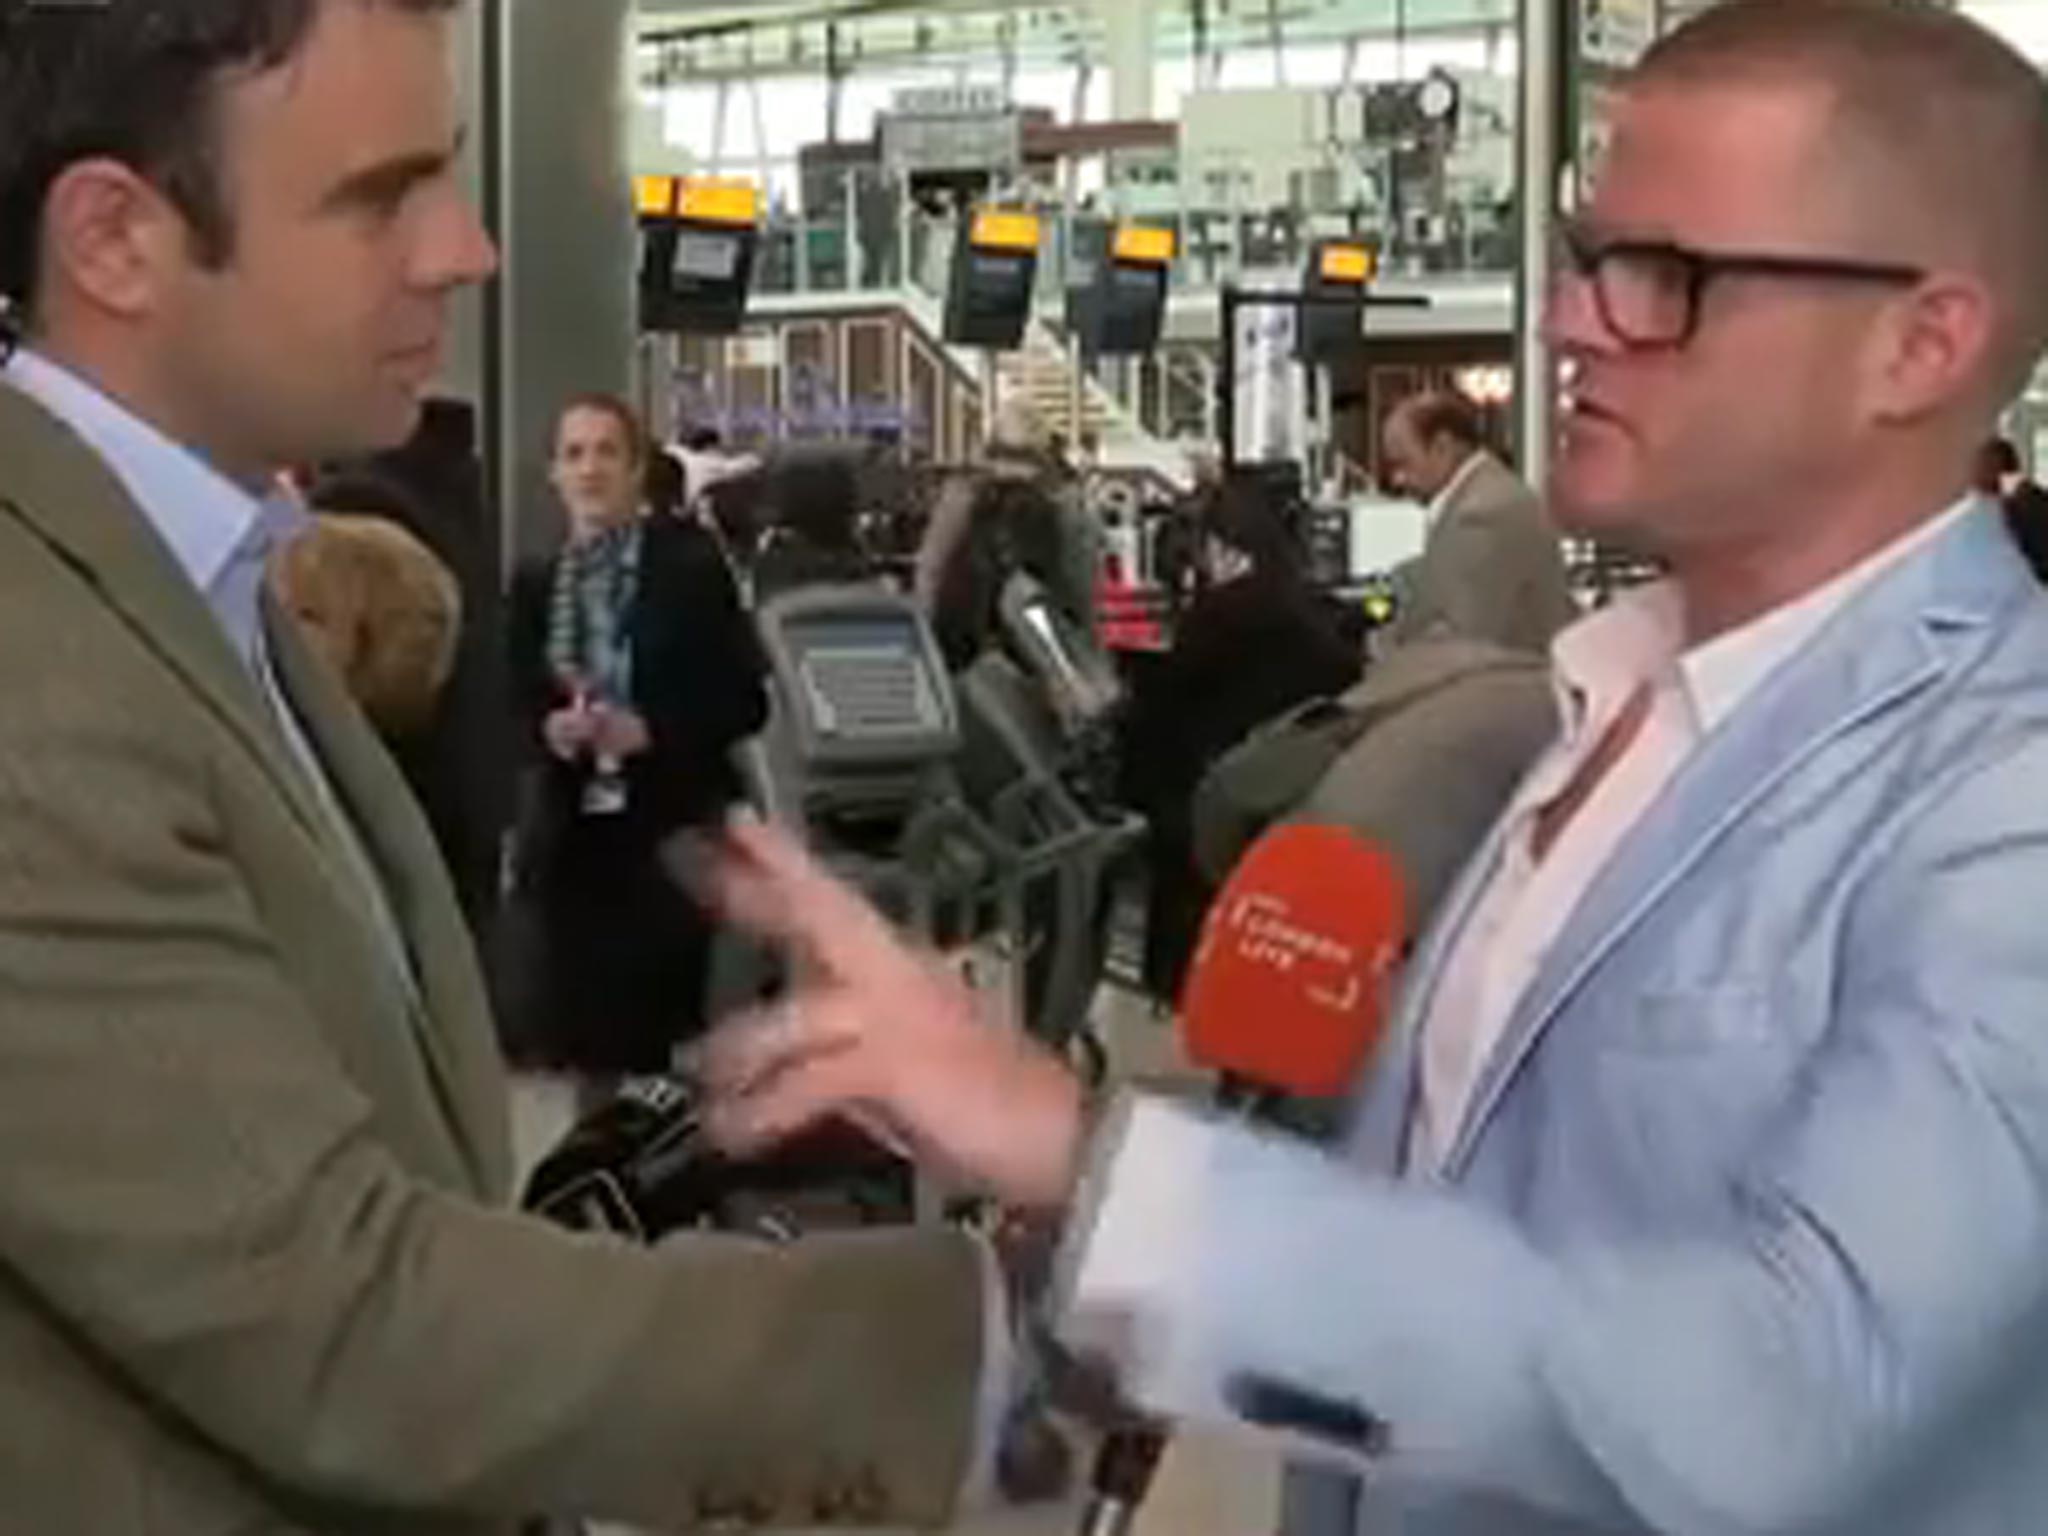 Heston Blumenthal speaks to London Live about his new restaurant in Heathrow Terminal 2